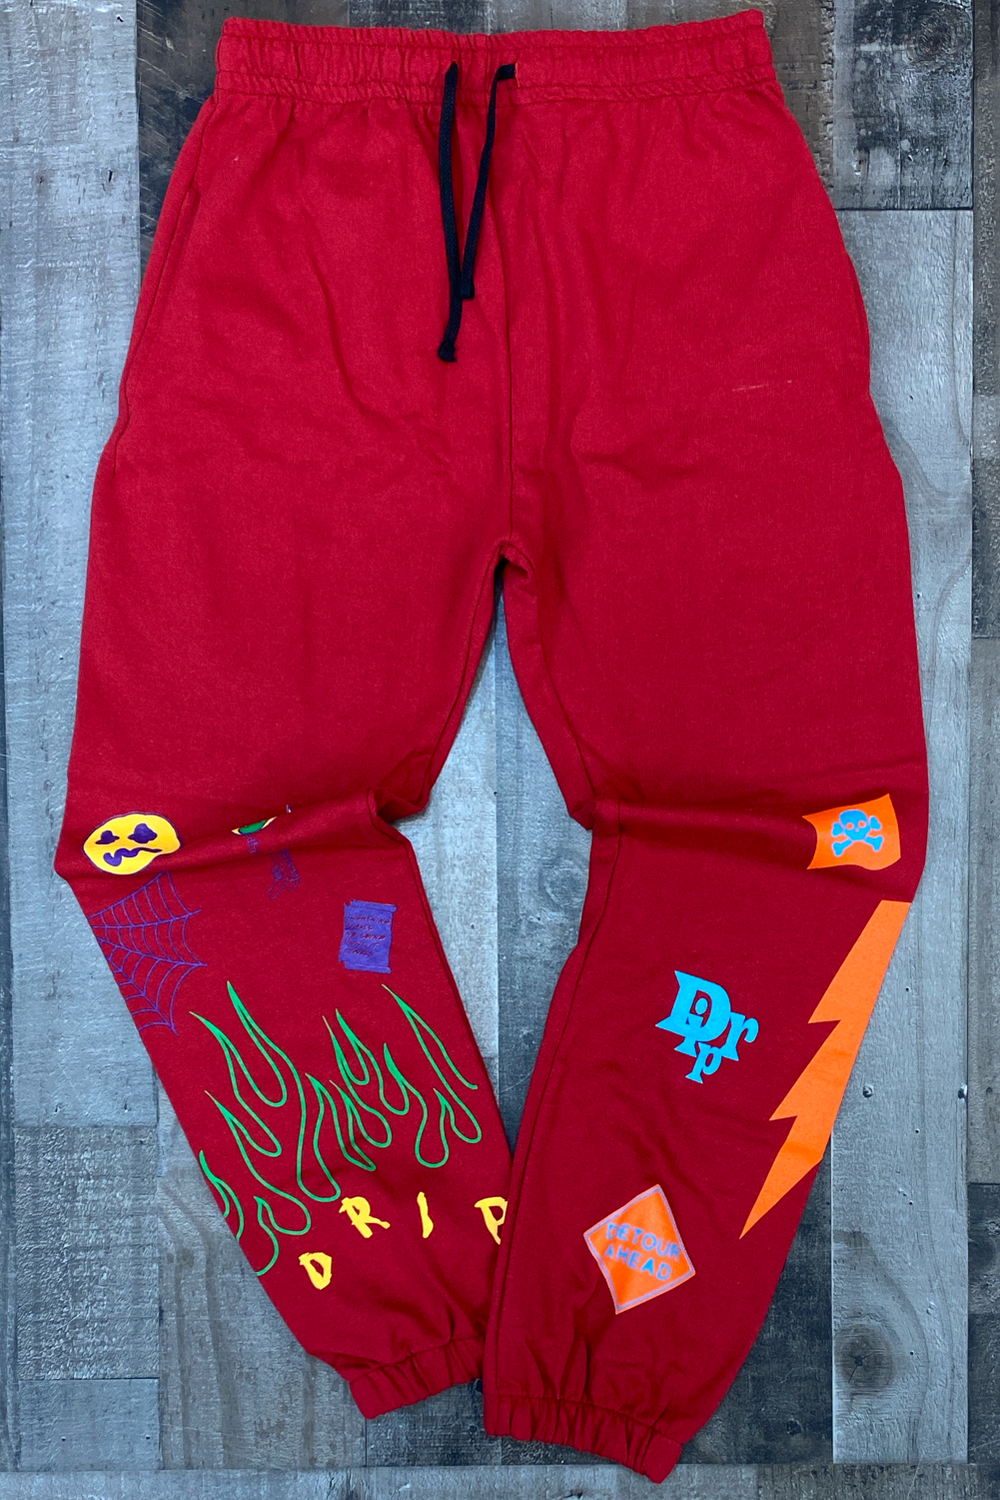 Cooper 9- “flame on drip” sweatpants (red)